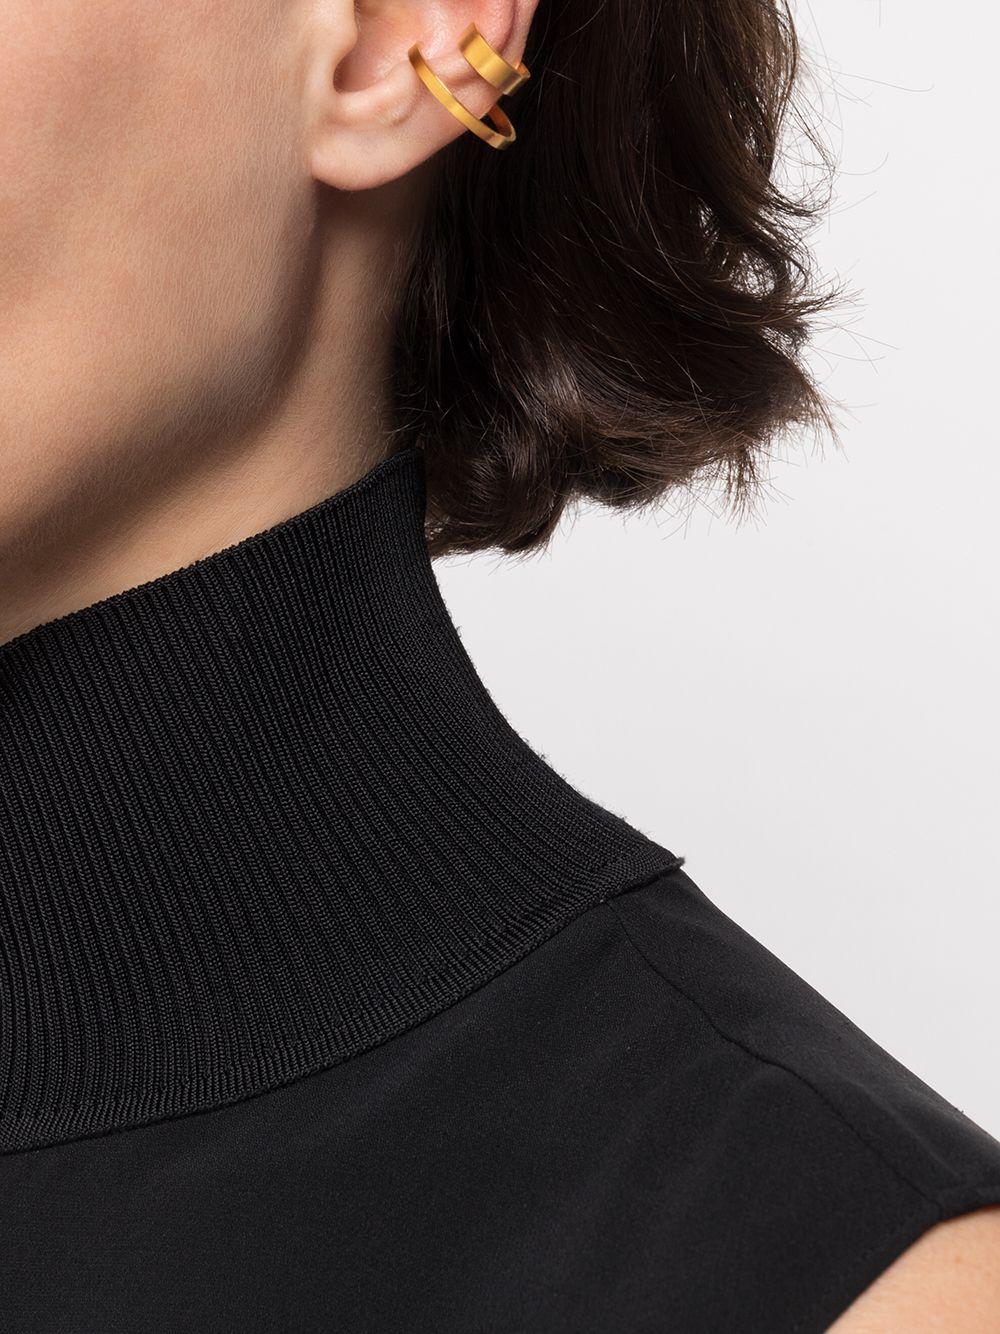 Unfinishing Line collection exudes minimalism and precision with its smooth lines and angles. Detail with a curved structure and cut out details. Lines Ear Cuff is perfect for day to night wear due to the simplistic neat design which can be paired